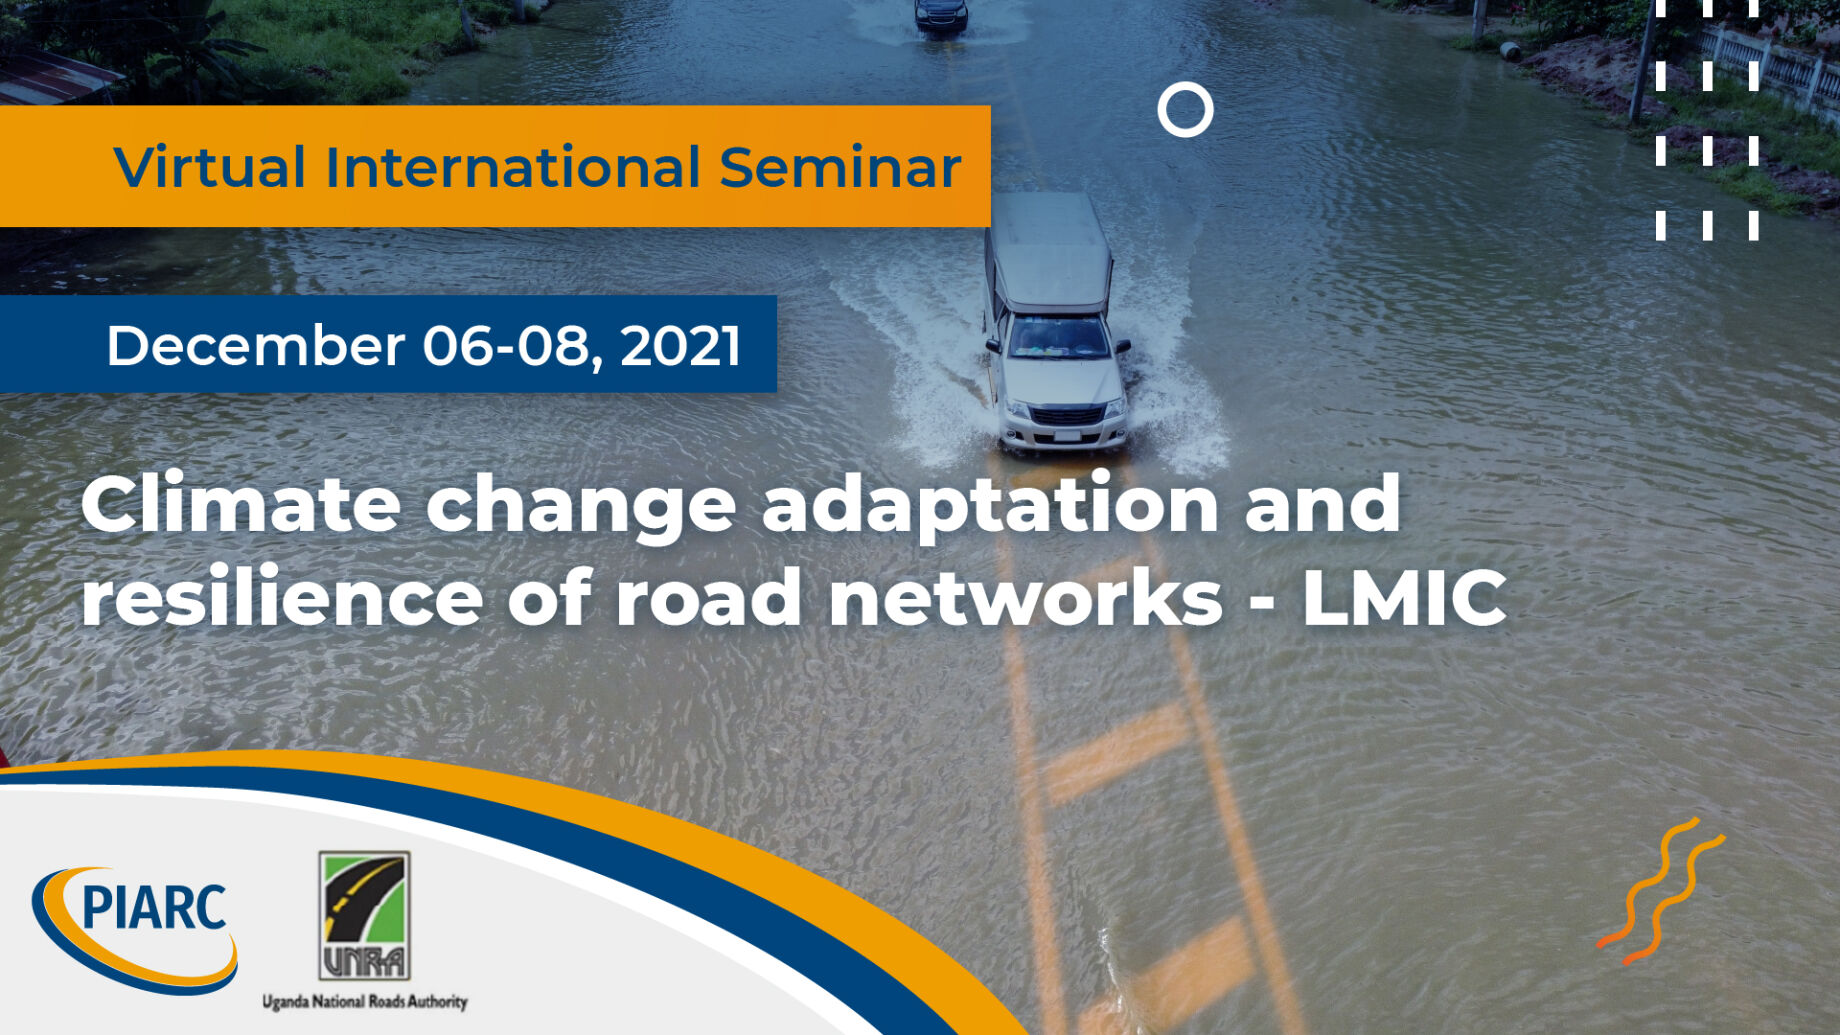 Learn about the impact of climate change on the road network by taking
part in the International Seminar organized by UNRA and PIARC